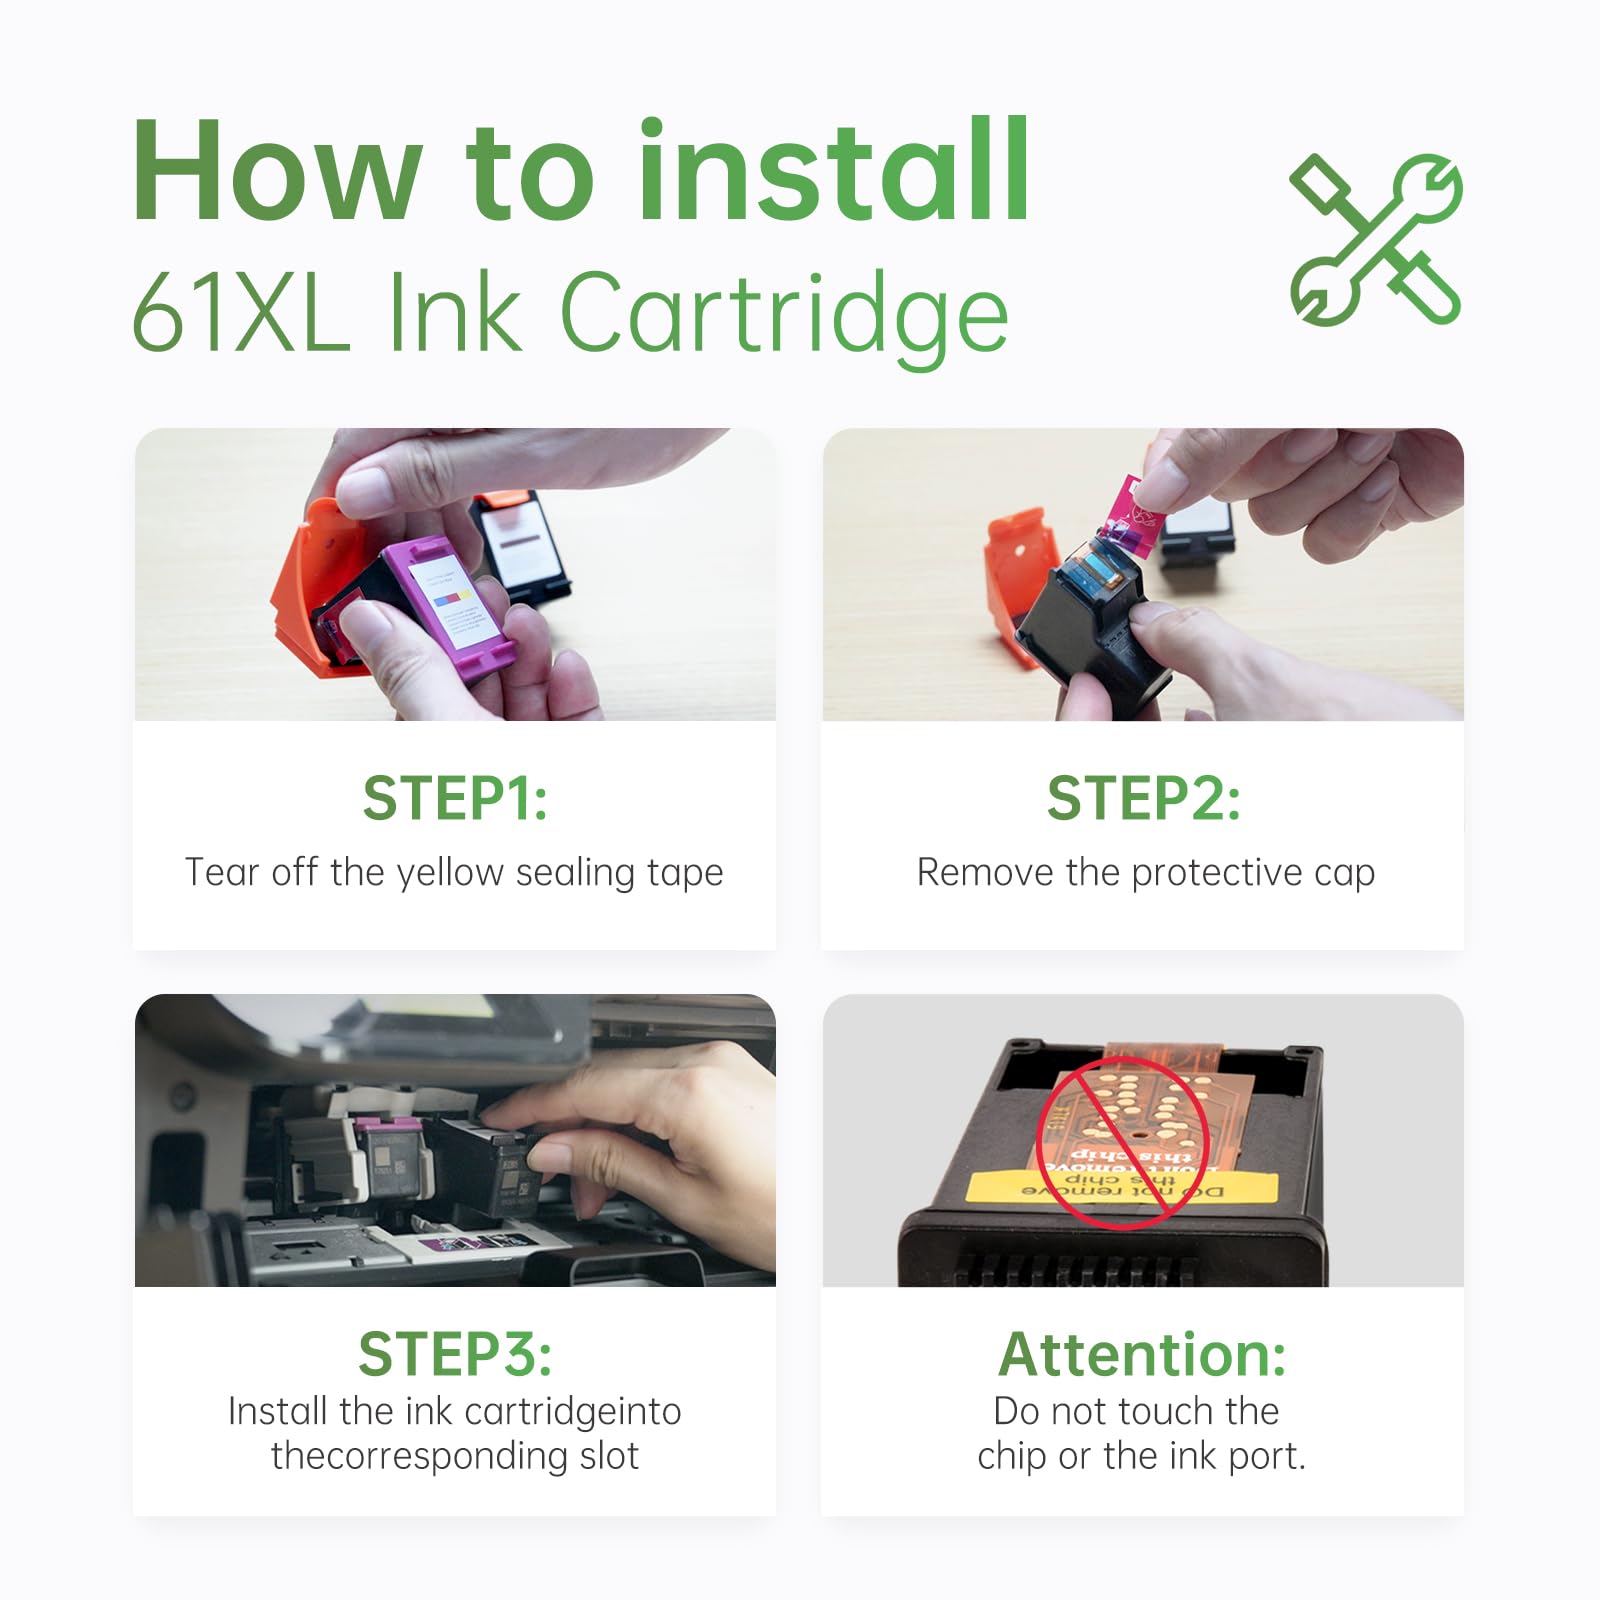 Installation Guide for LEMERO HP 61XL Black Ink Cartridges:Step-by-step visual guide on how to install LEMERO HP 61XL black ink cartridges, including tips on handling the cartridge to avoid touching the chip.